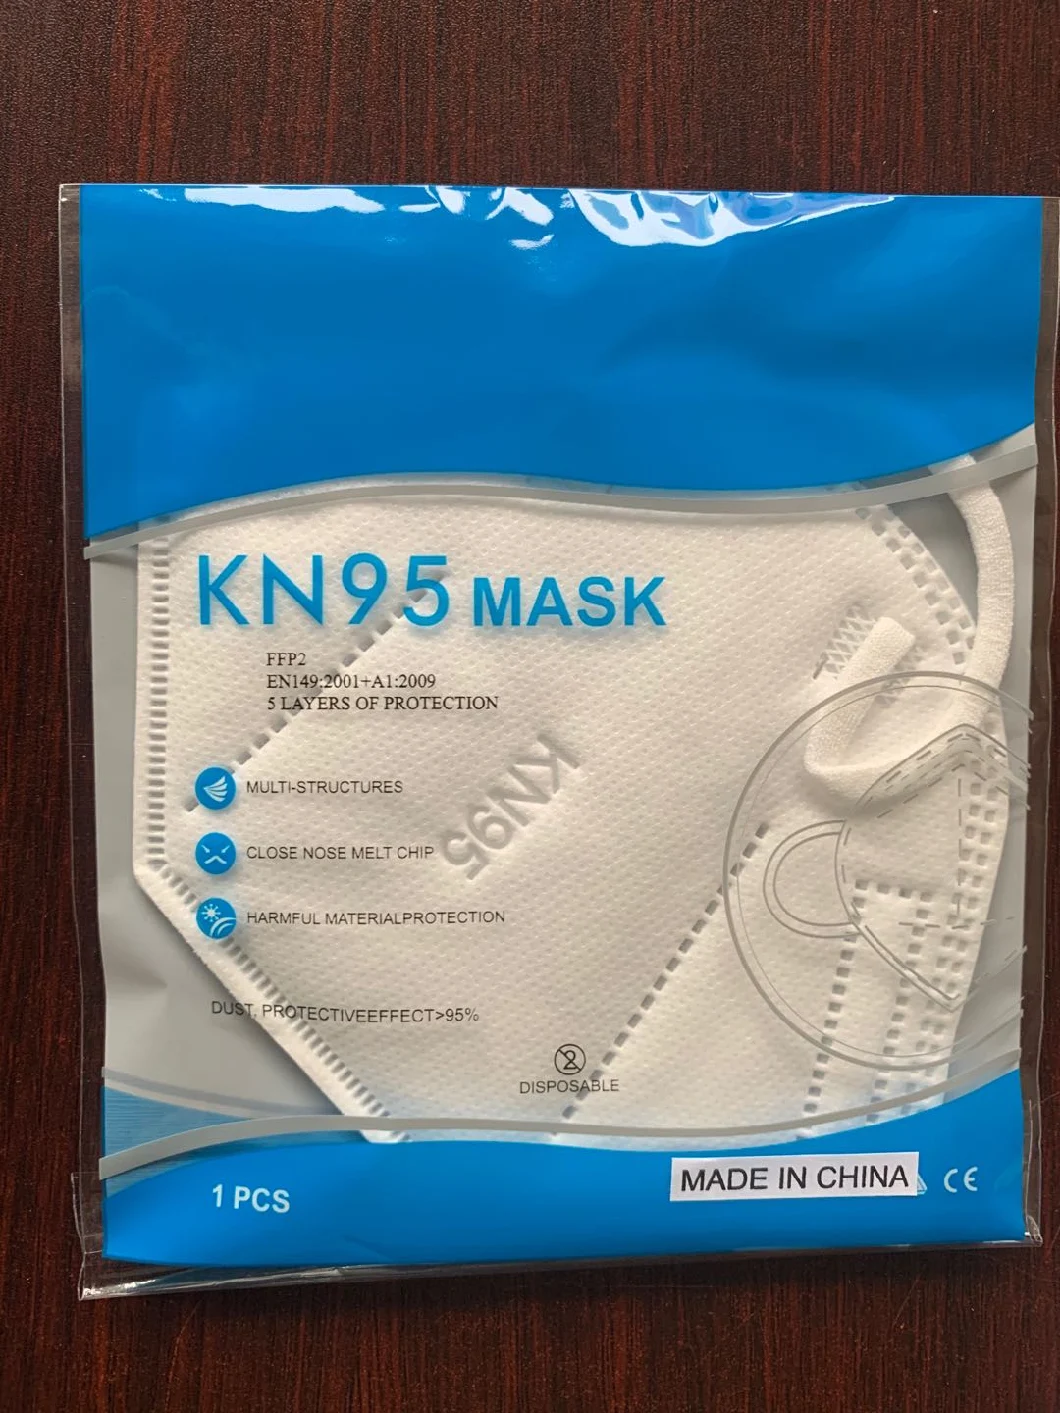 High Quality Pm2.5 Air Filtered 5 Ply Kn-95 Non-Medical Disposable Face Mask